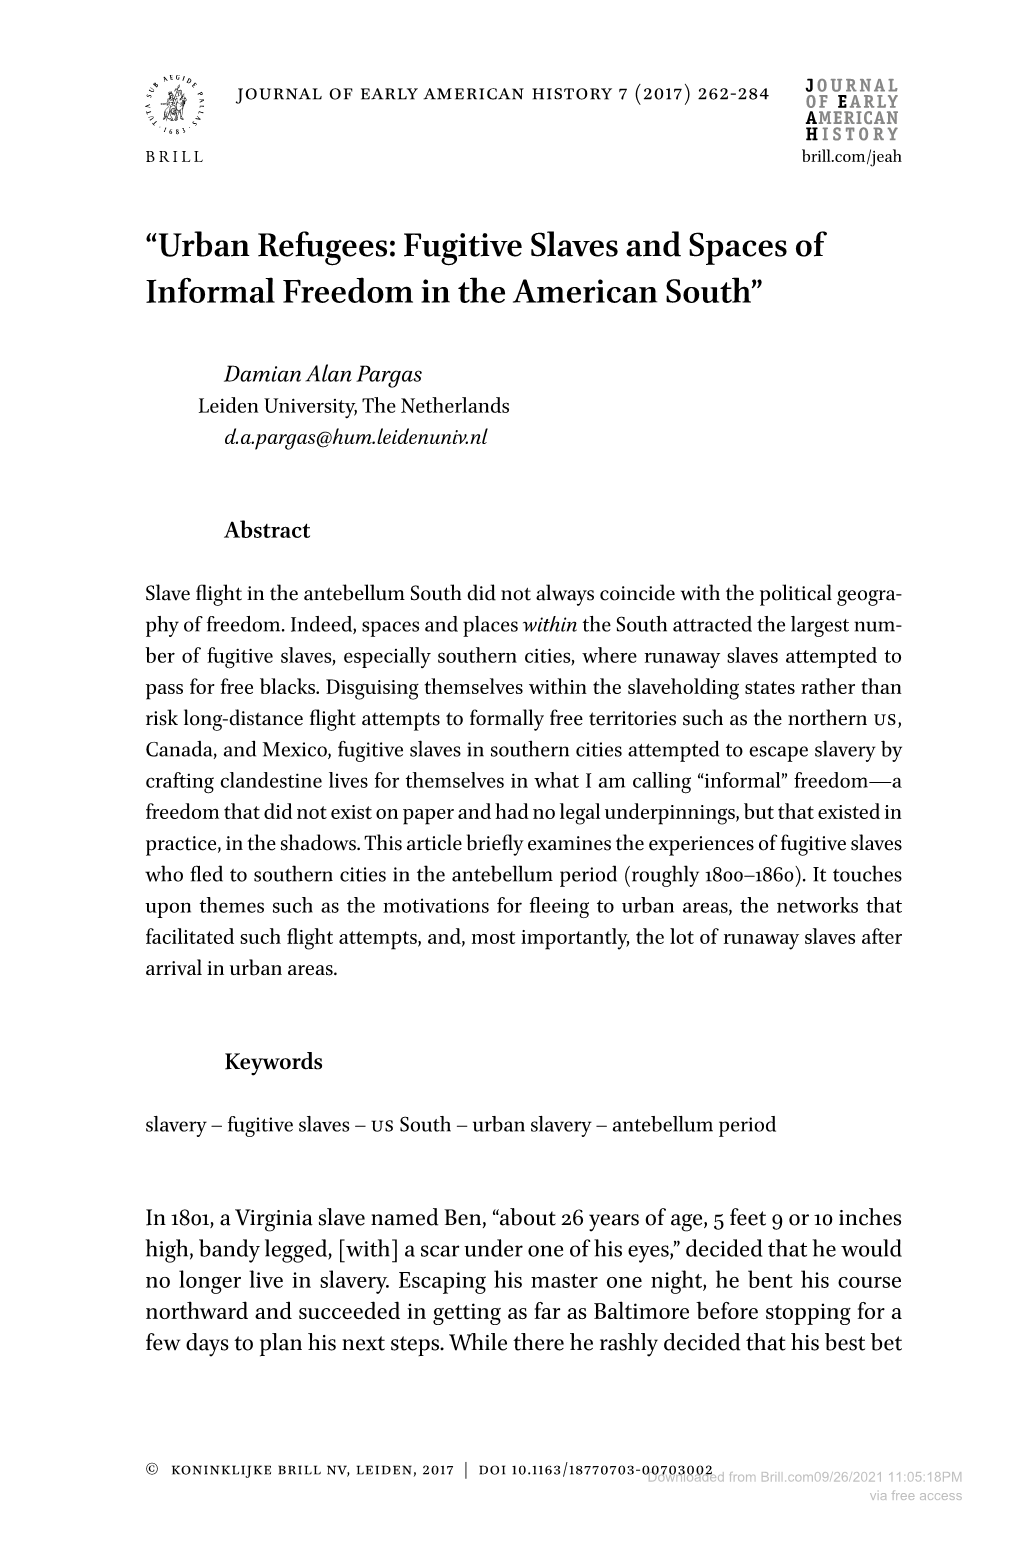 Urban Refugees: Fugitive Slaves and Spaces of Informal Freedom in the American South”